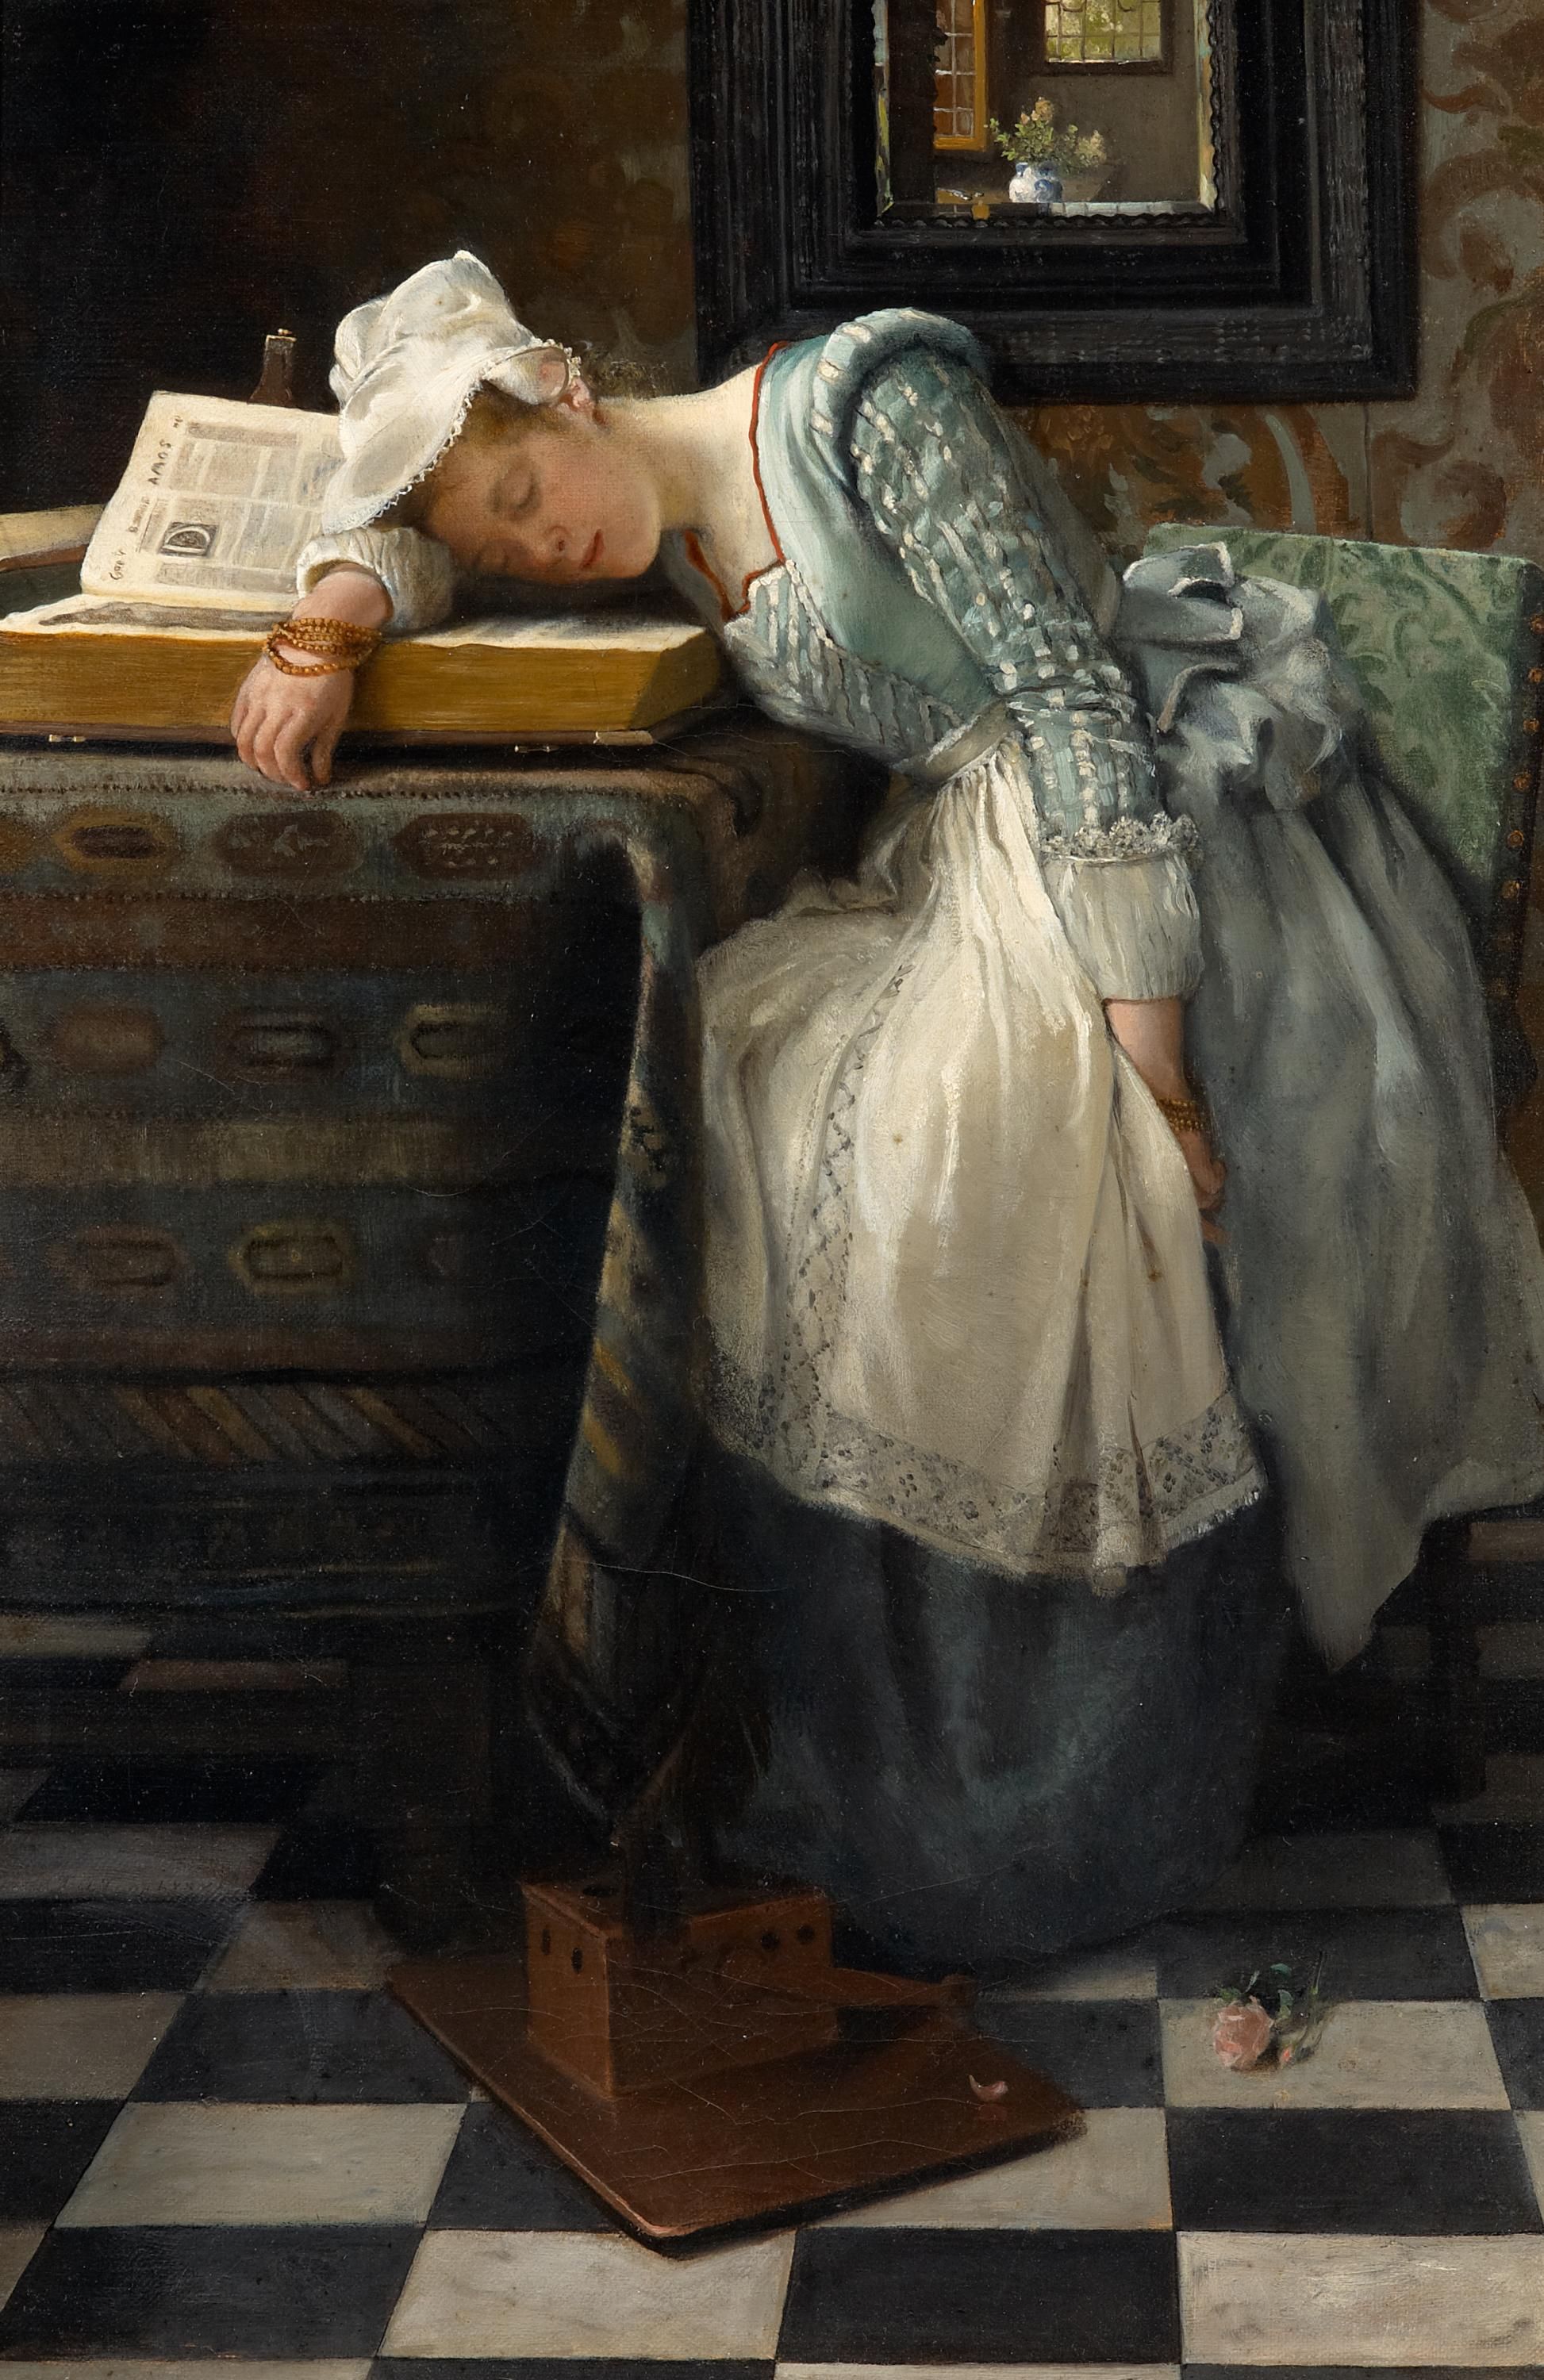 World of Dreams by Laura Theresa Alma Tadema - 1876 - 46 x 31 cm private collection